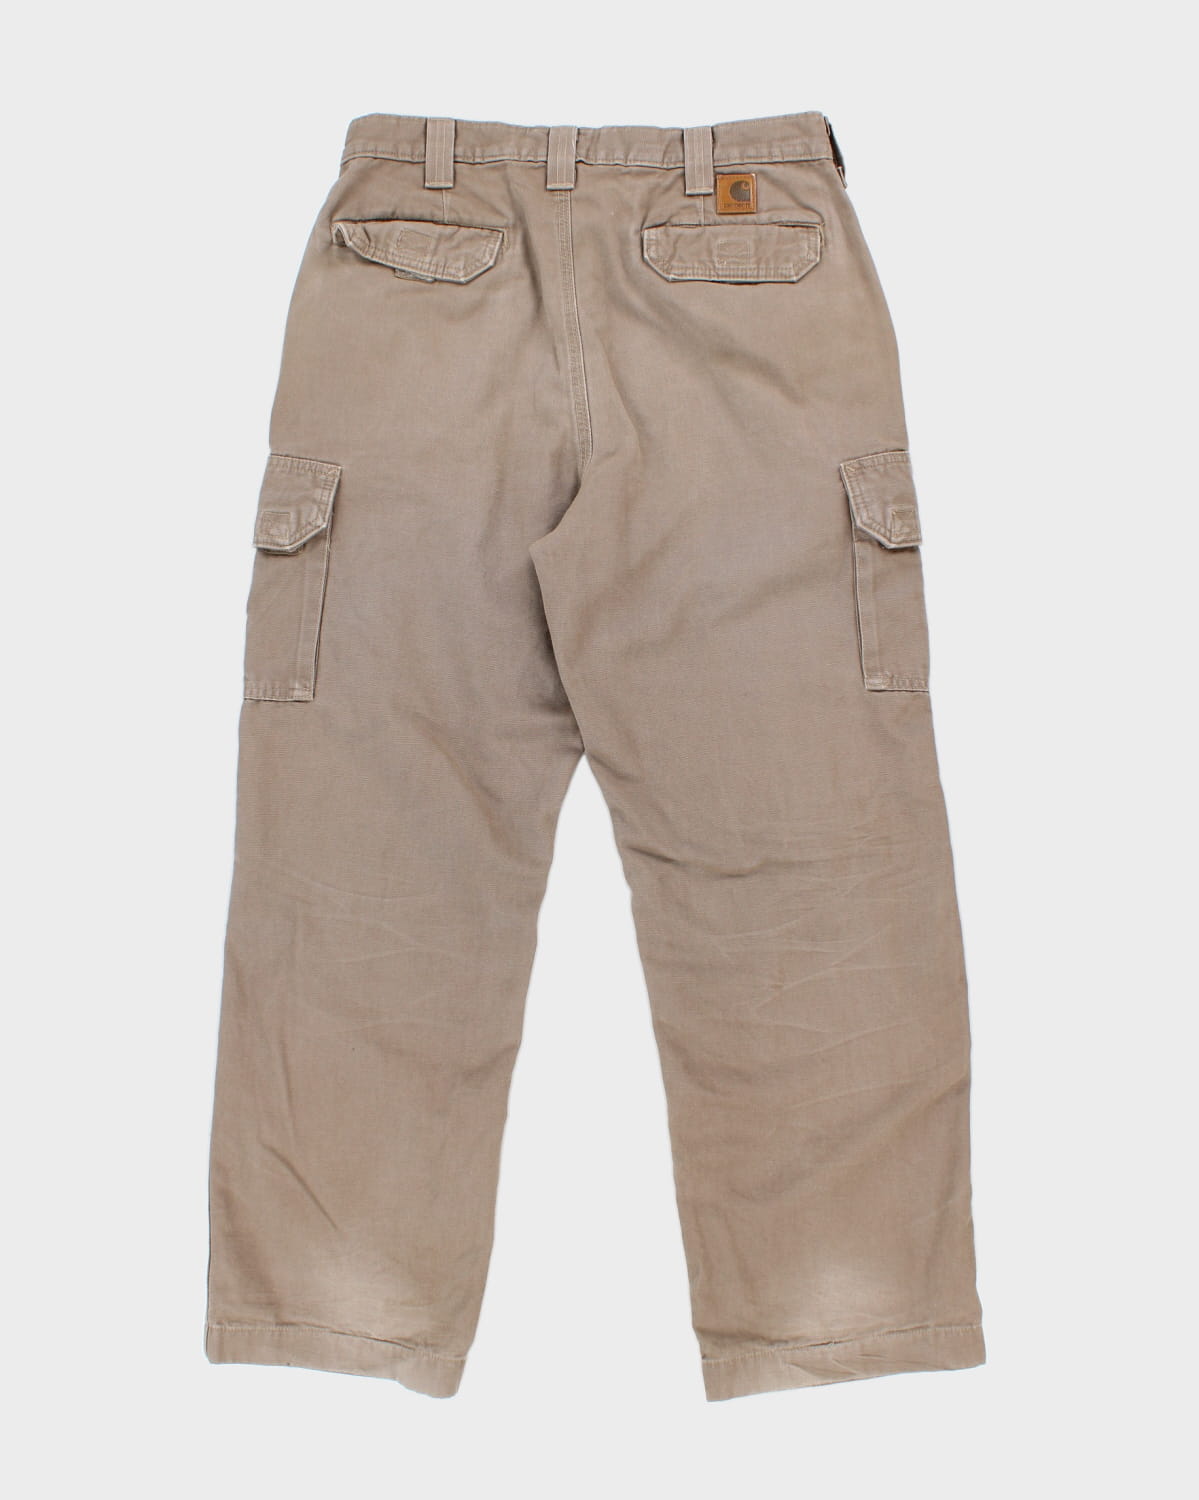 Carhart Brown Cargo Trousers - W32 L34